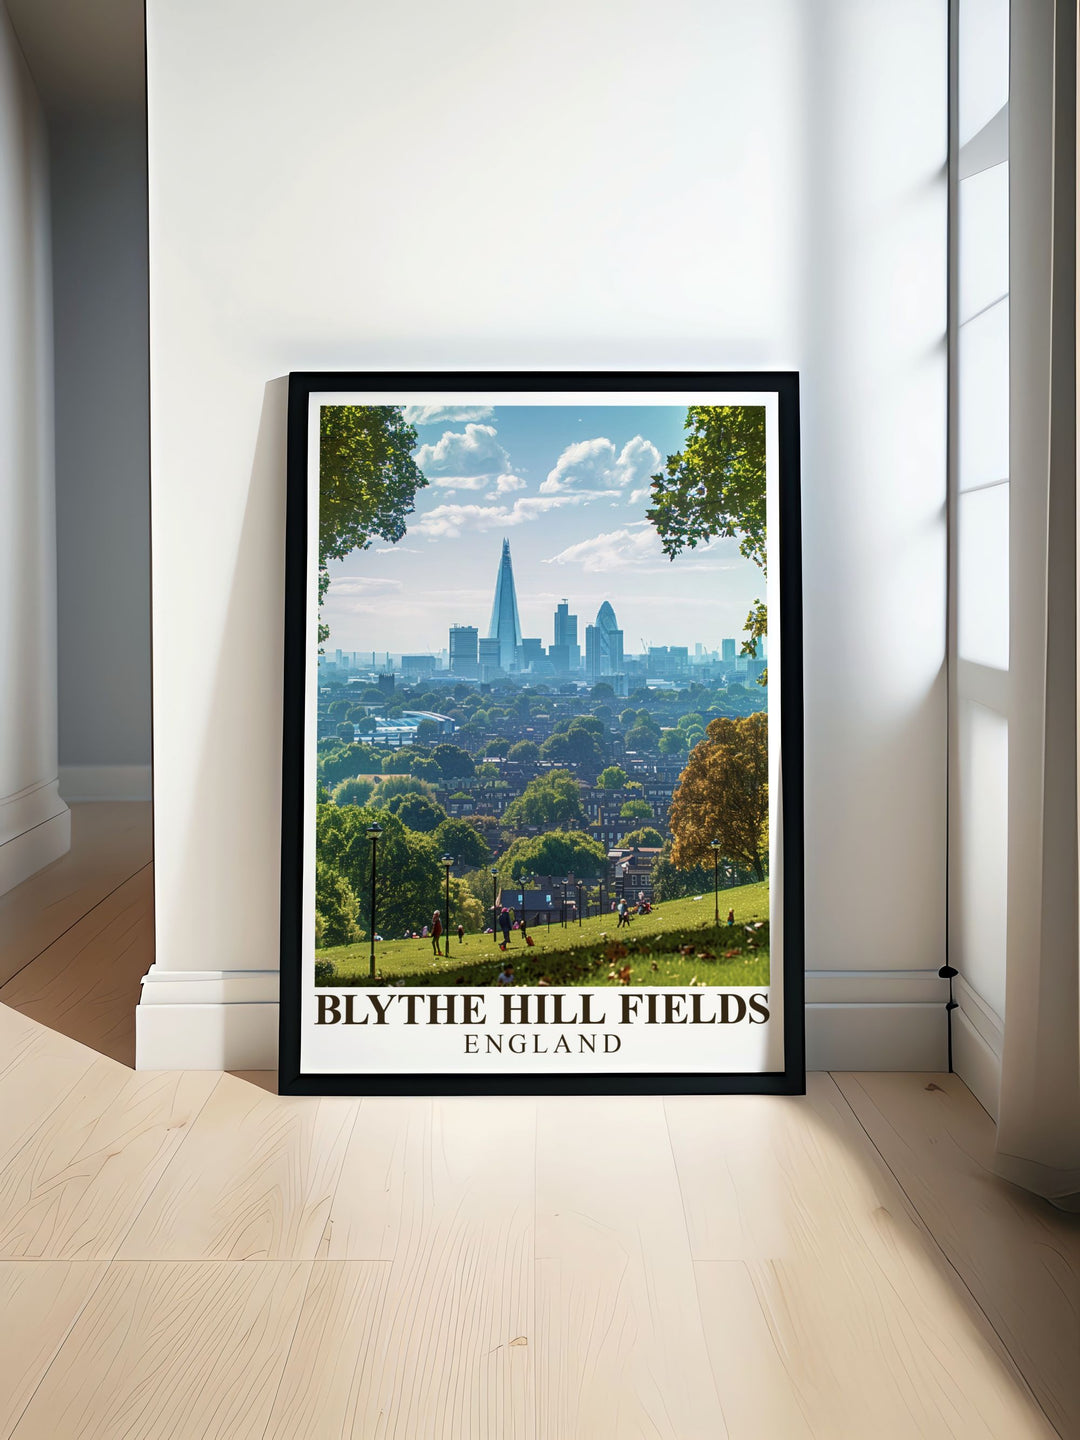 The charm of Blythe Hill Fields, with its blend of natural beauty and urban vistas, is brought to life in this poster, offering a piece of Londons park allure for your home.